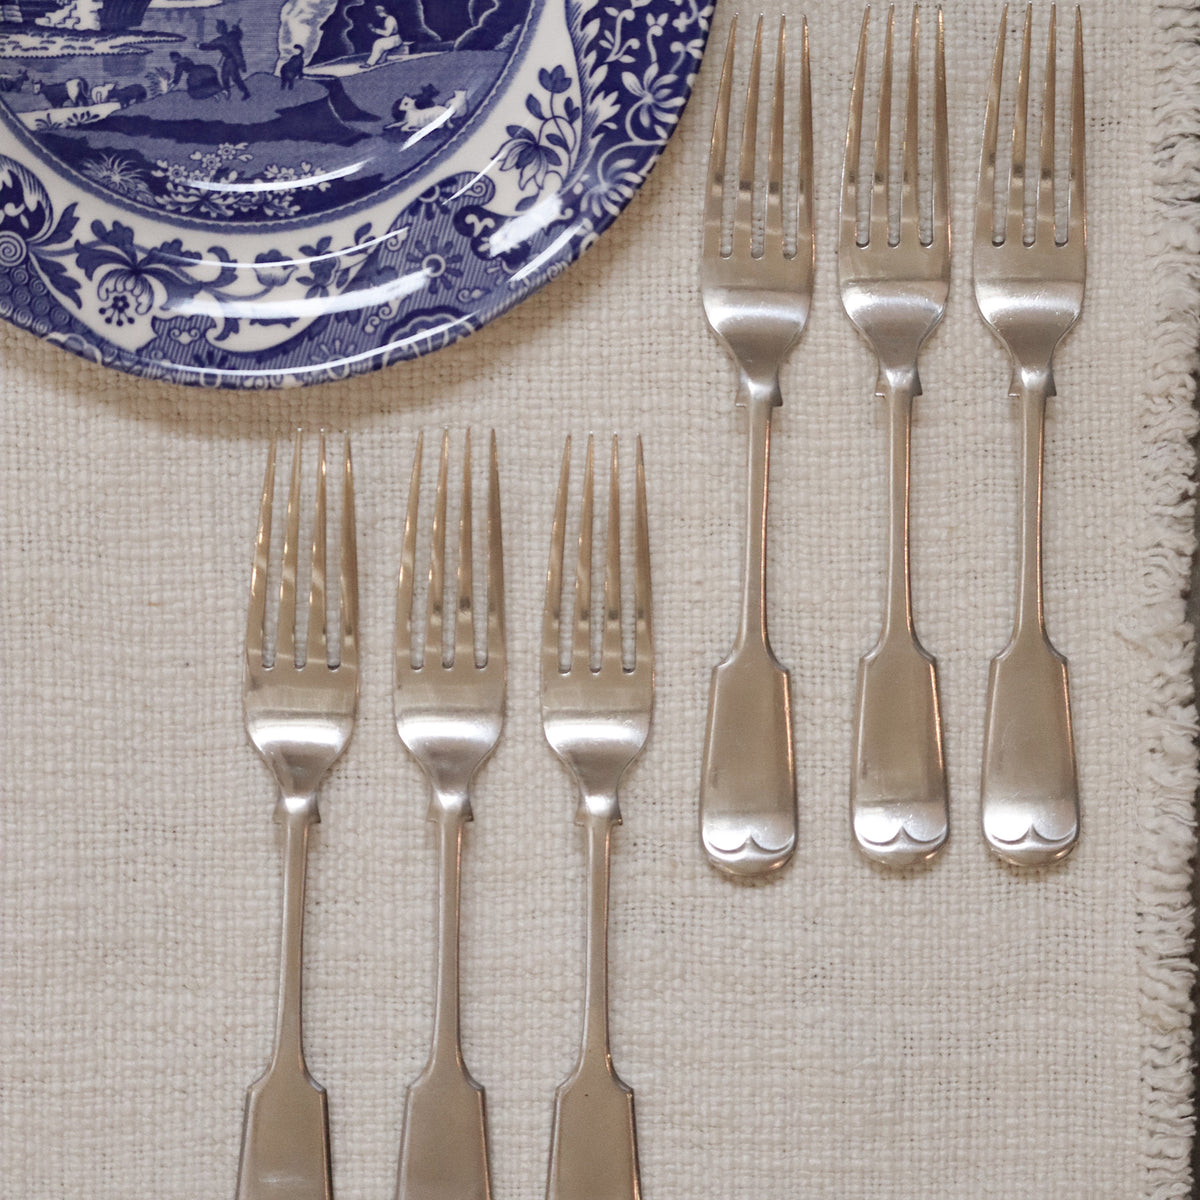 Thomas Wilkinson &amp; Sons Antique Silver Plate Forks, set of 6